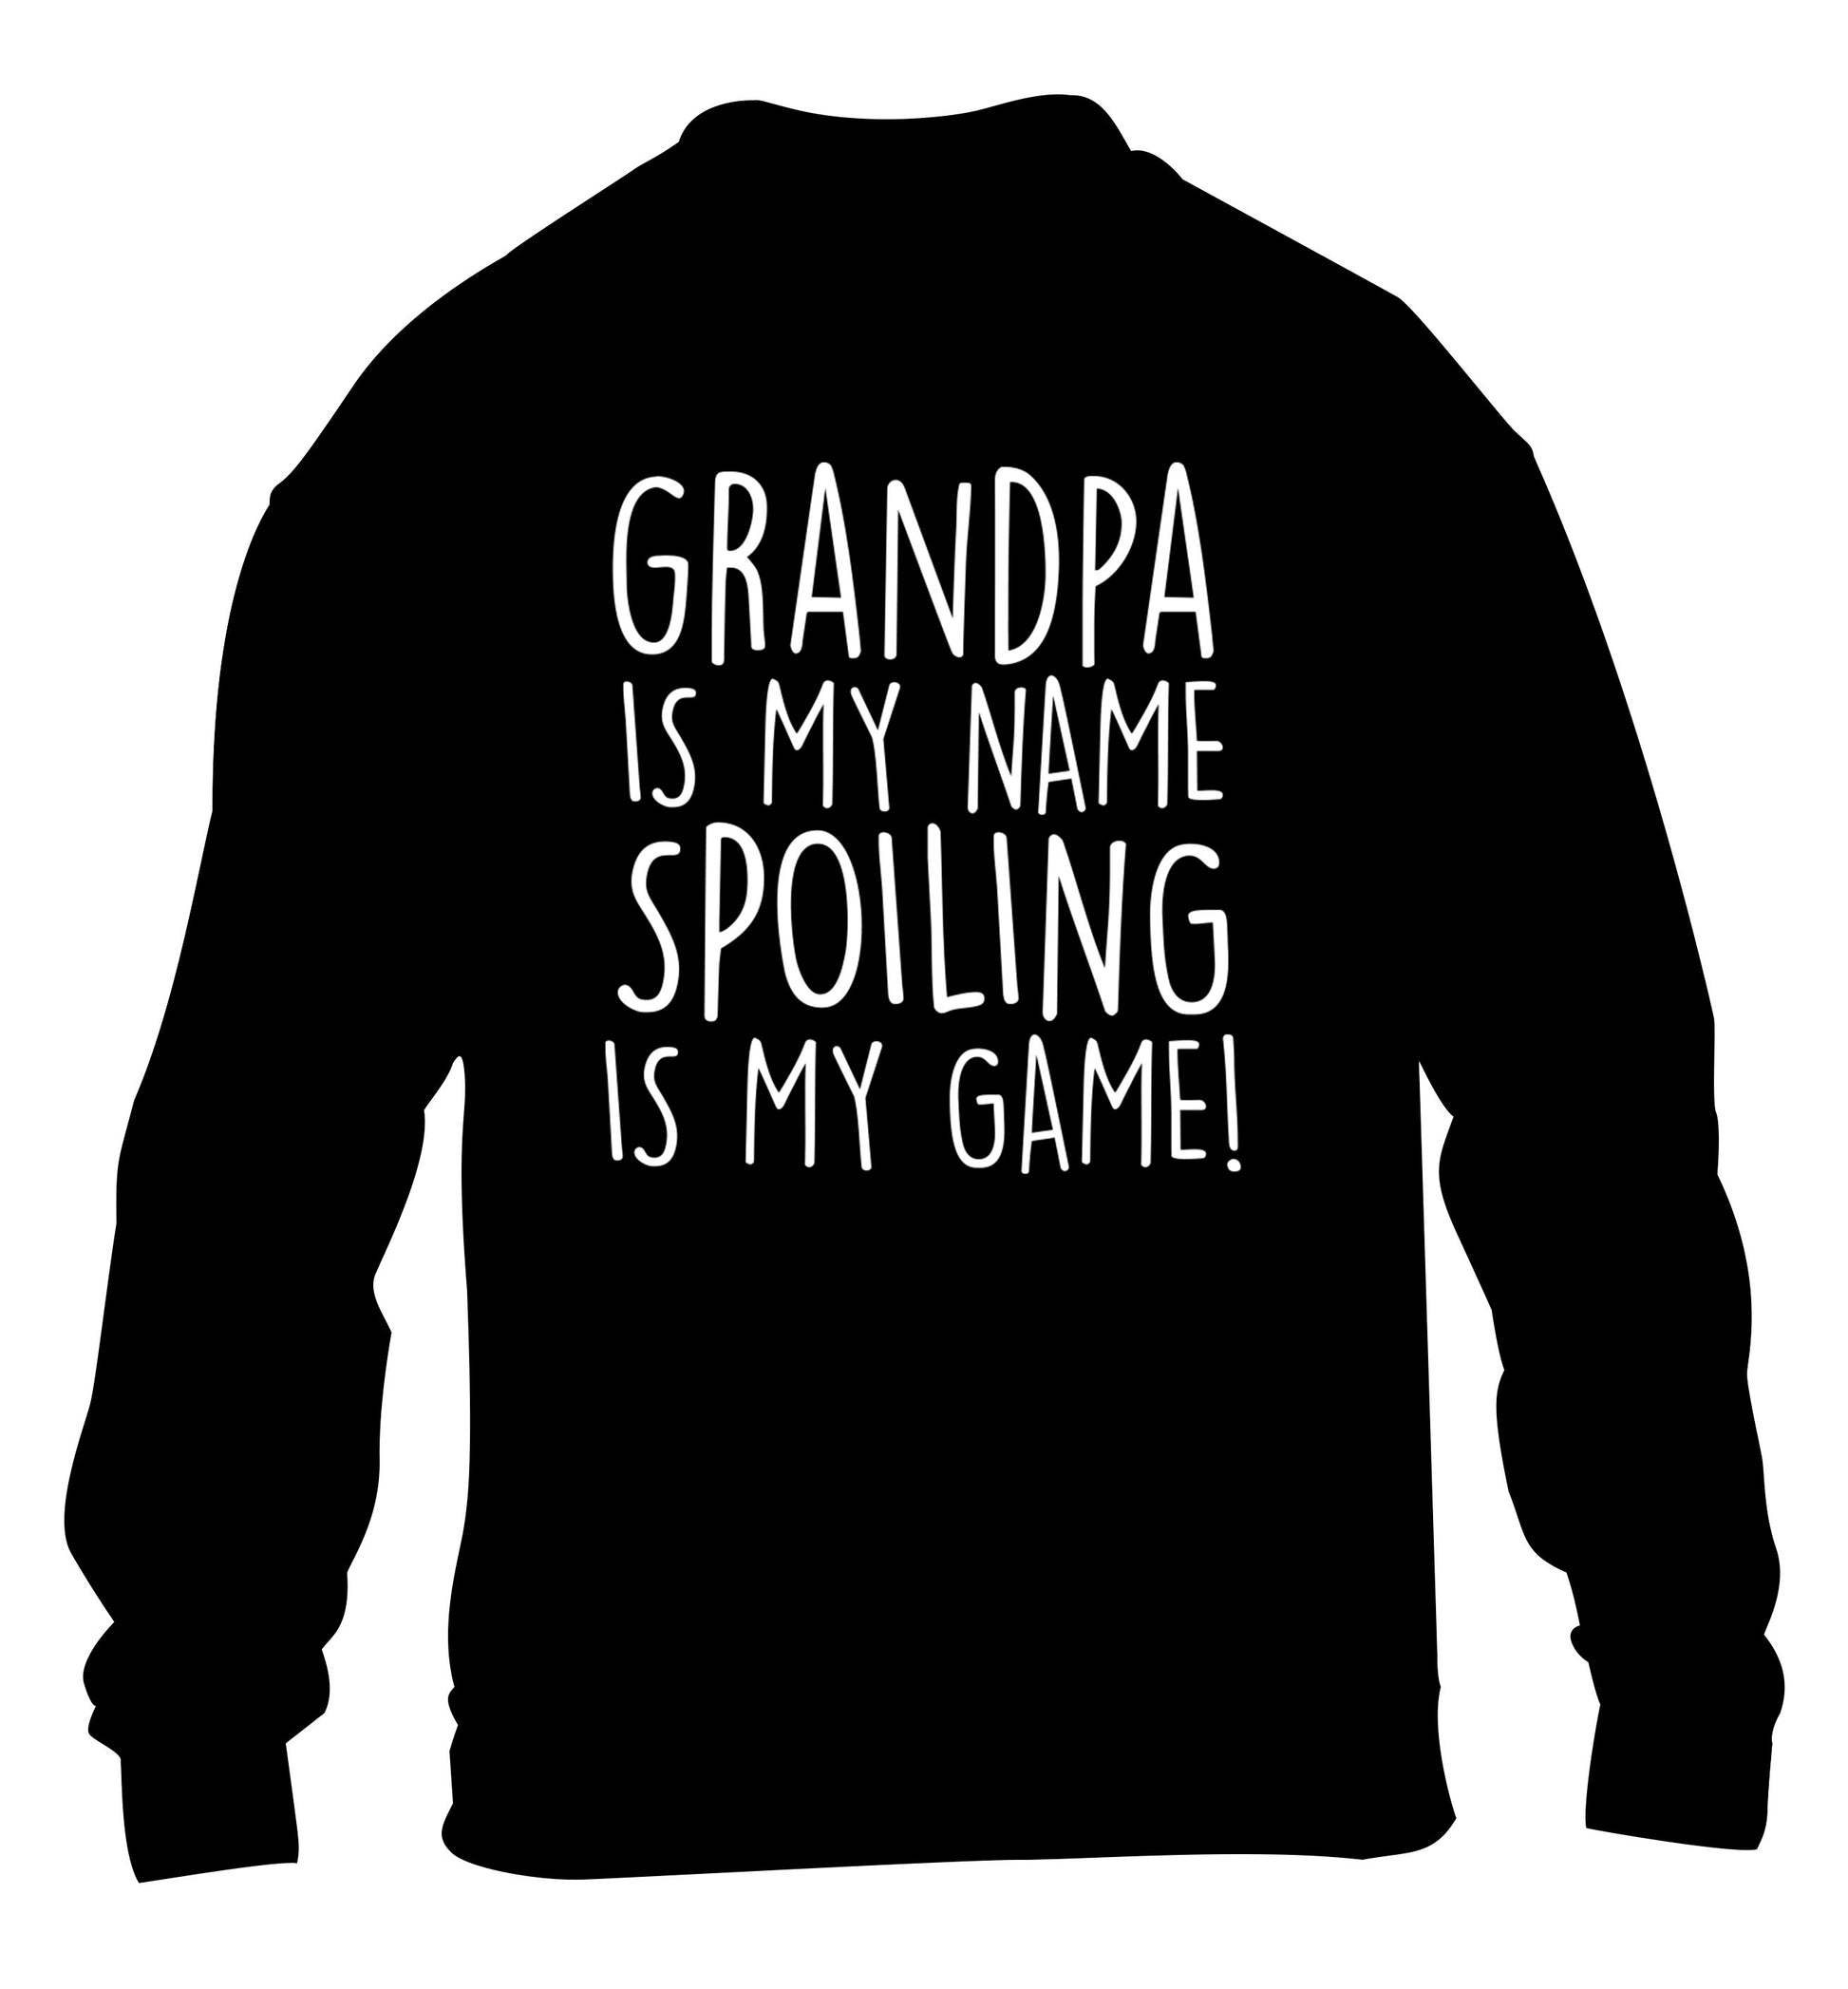 Grandpa is my name, spoiling is my game children's black sweater 12-14 Years